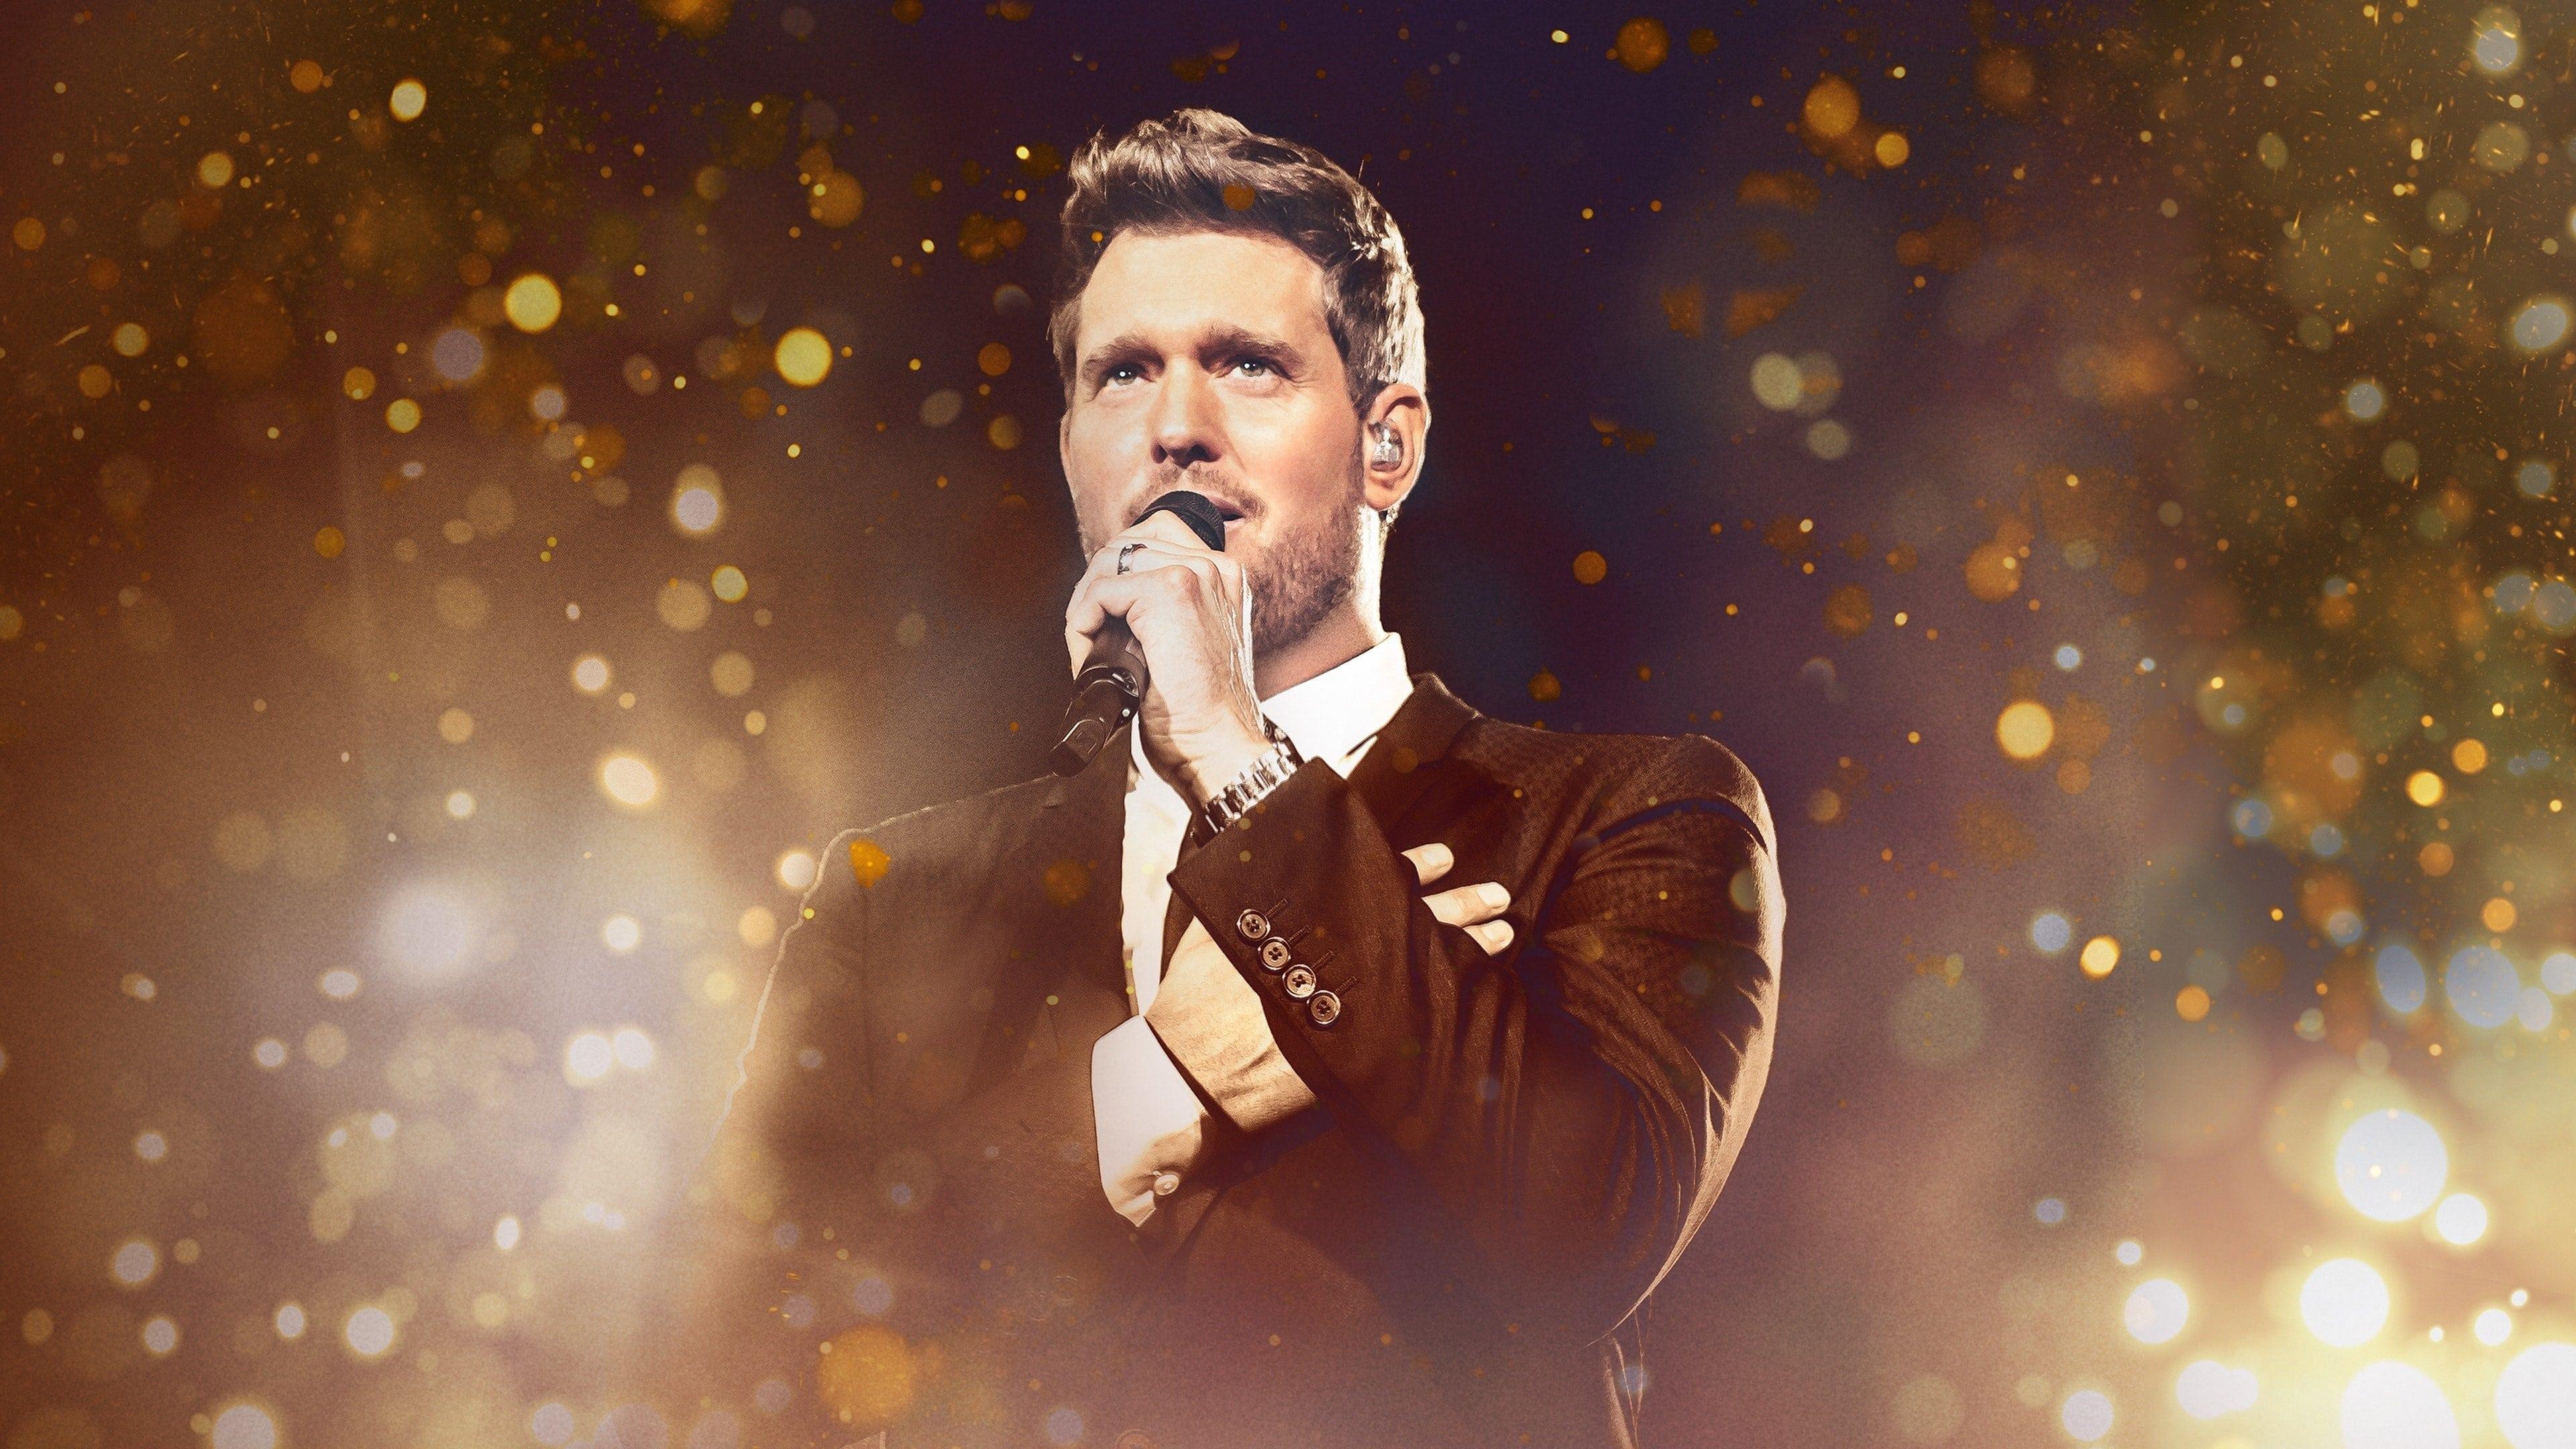 Michael Bublé's Christmas in the City backdrop